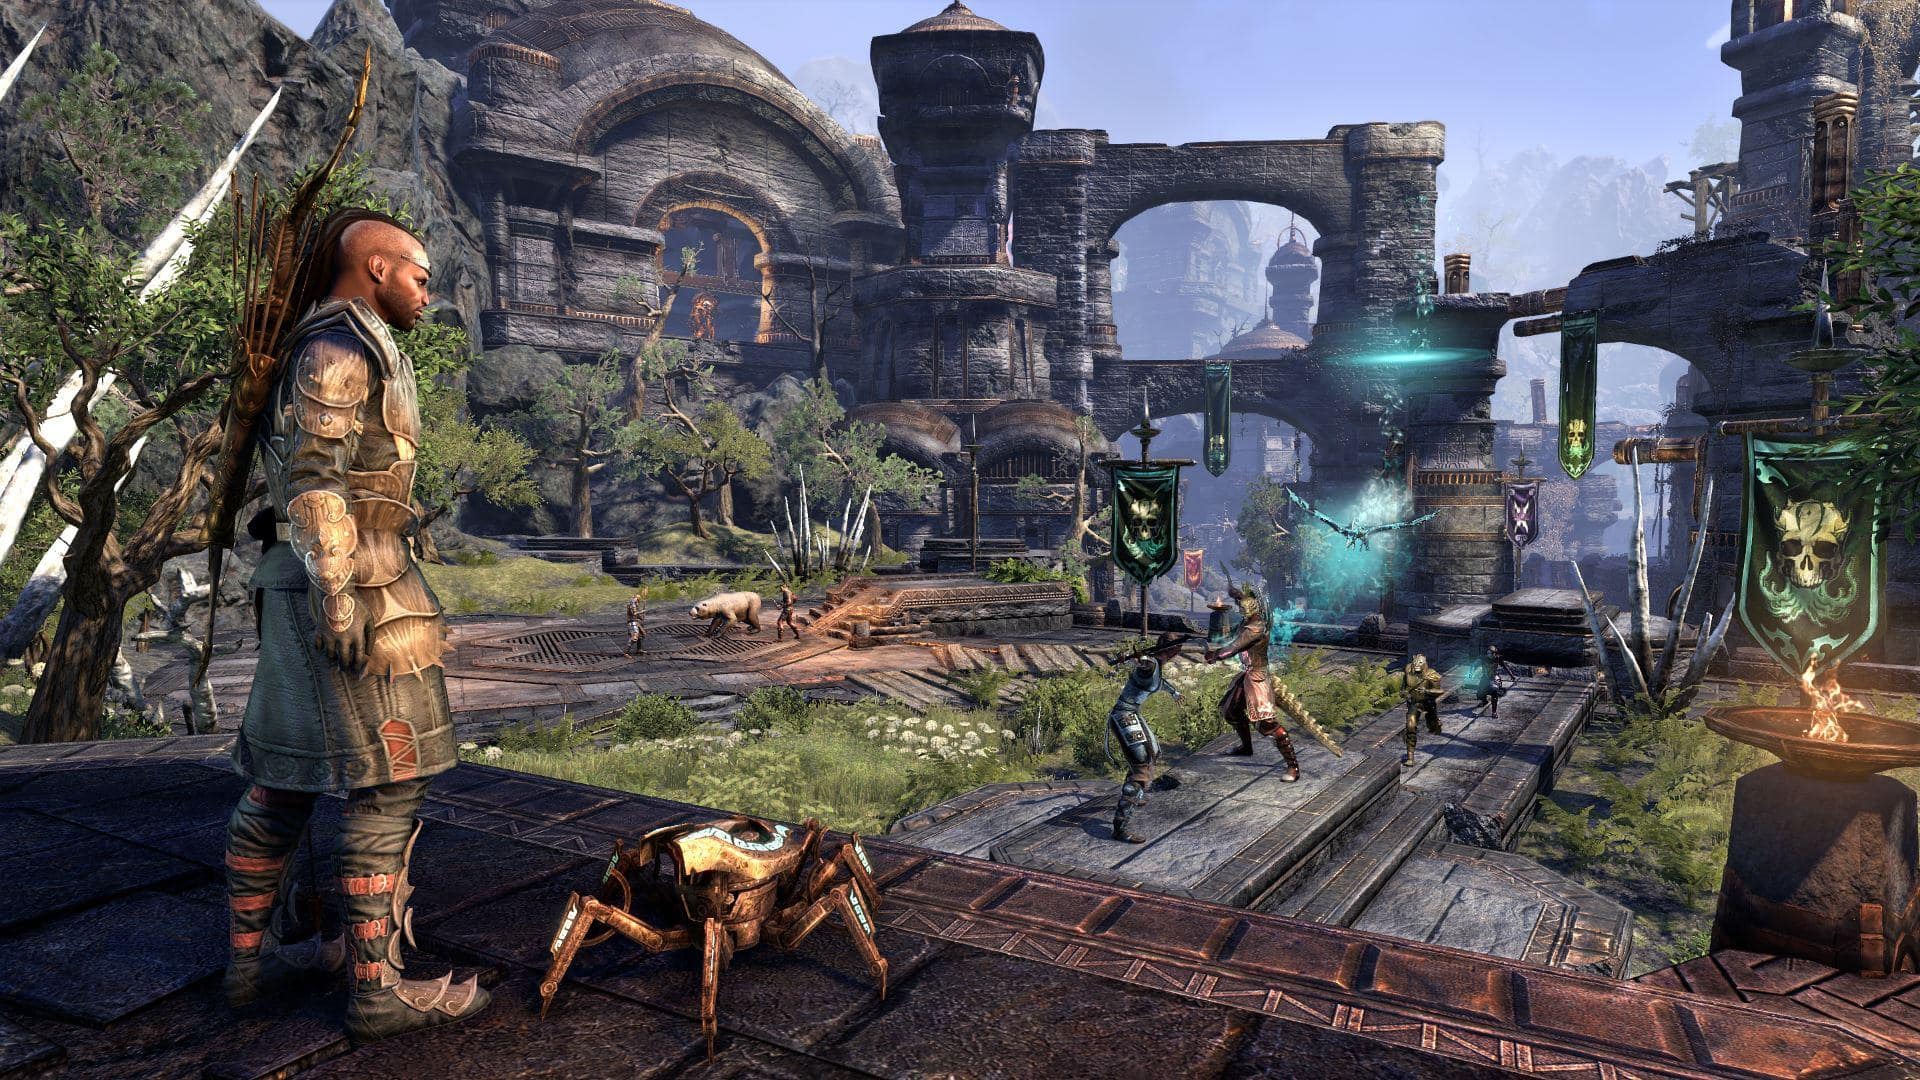 Elder Scrolls Online PvPers are grumpy over an out-of-context stream clip